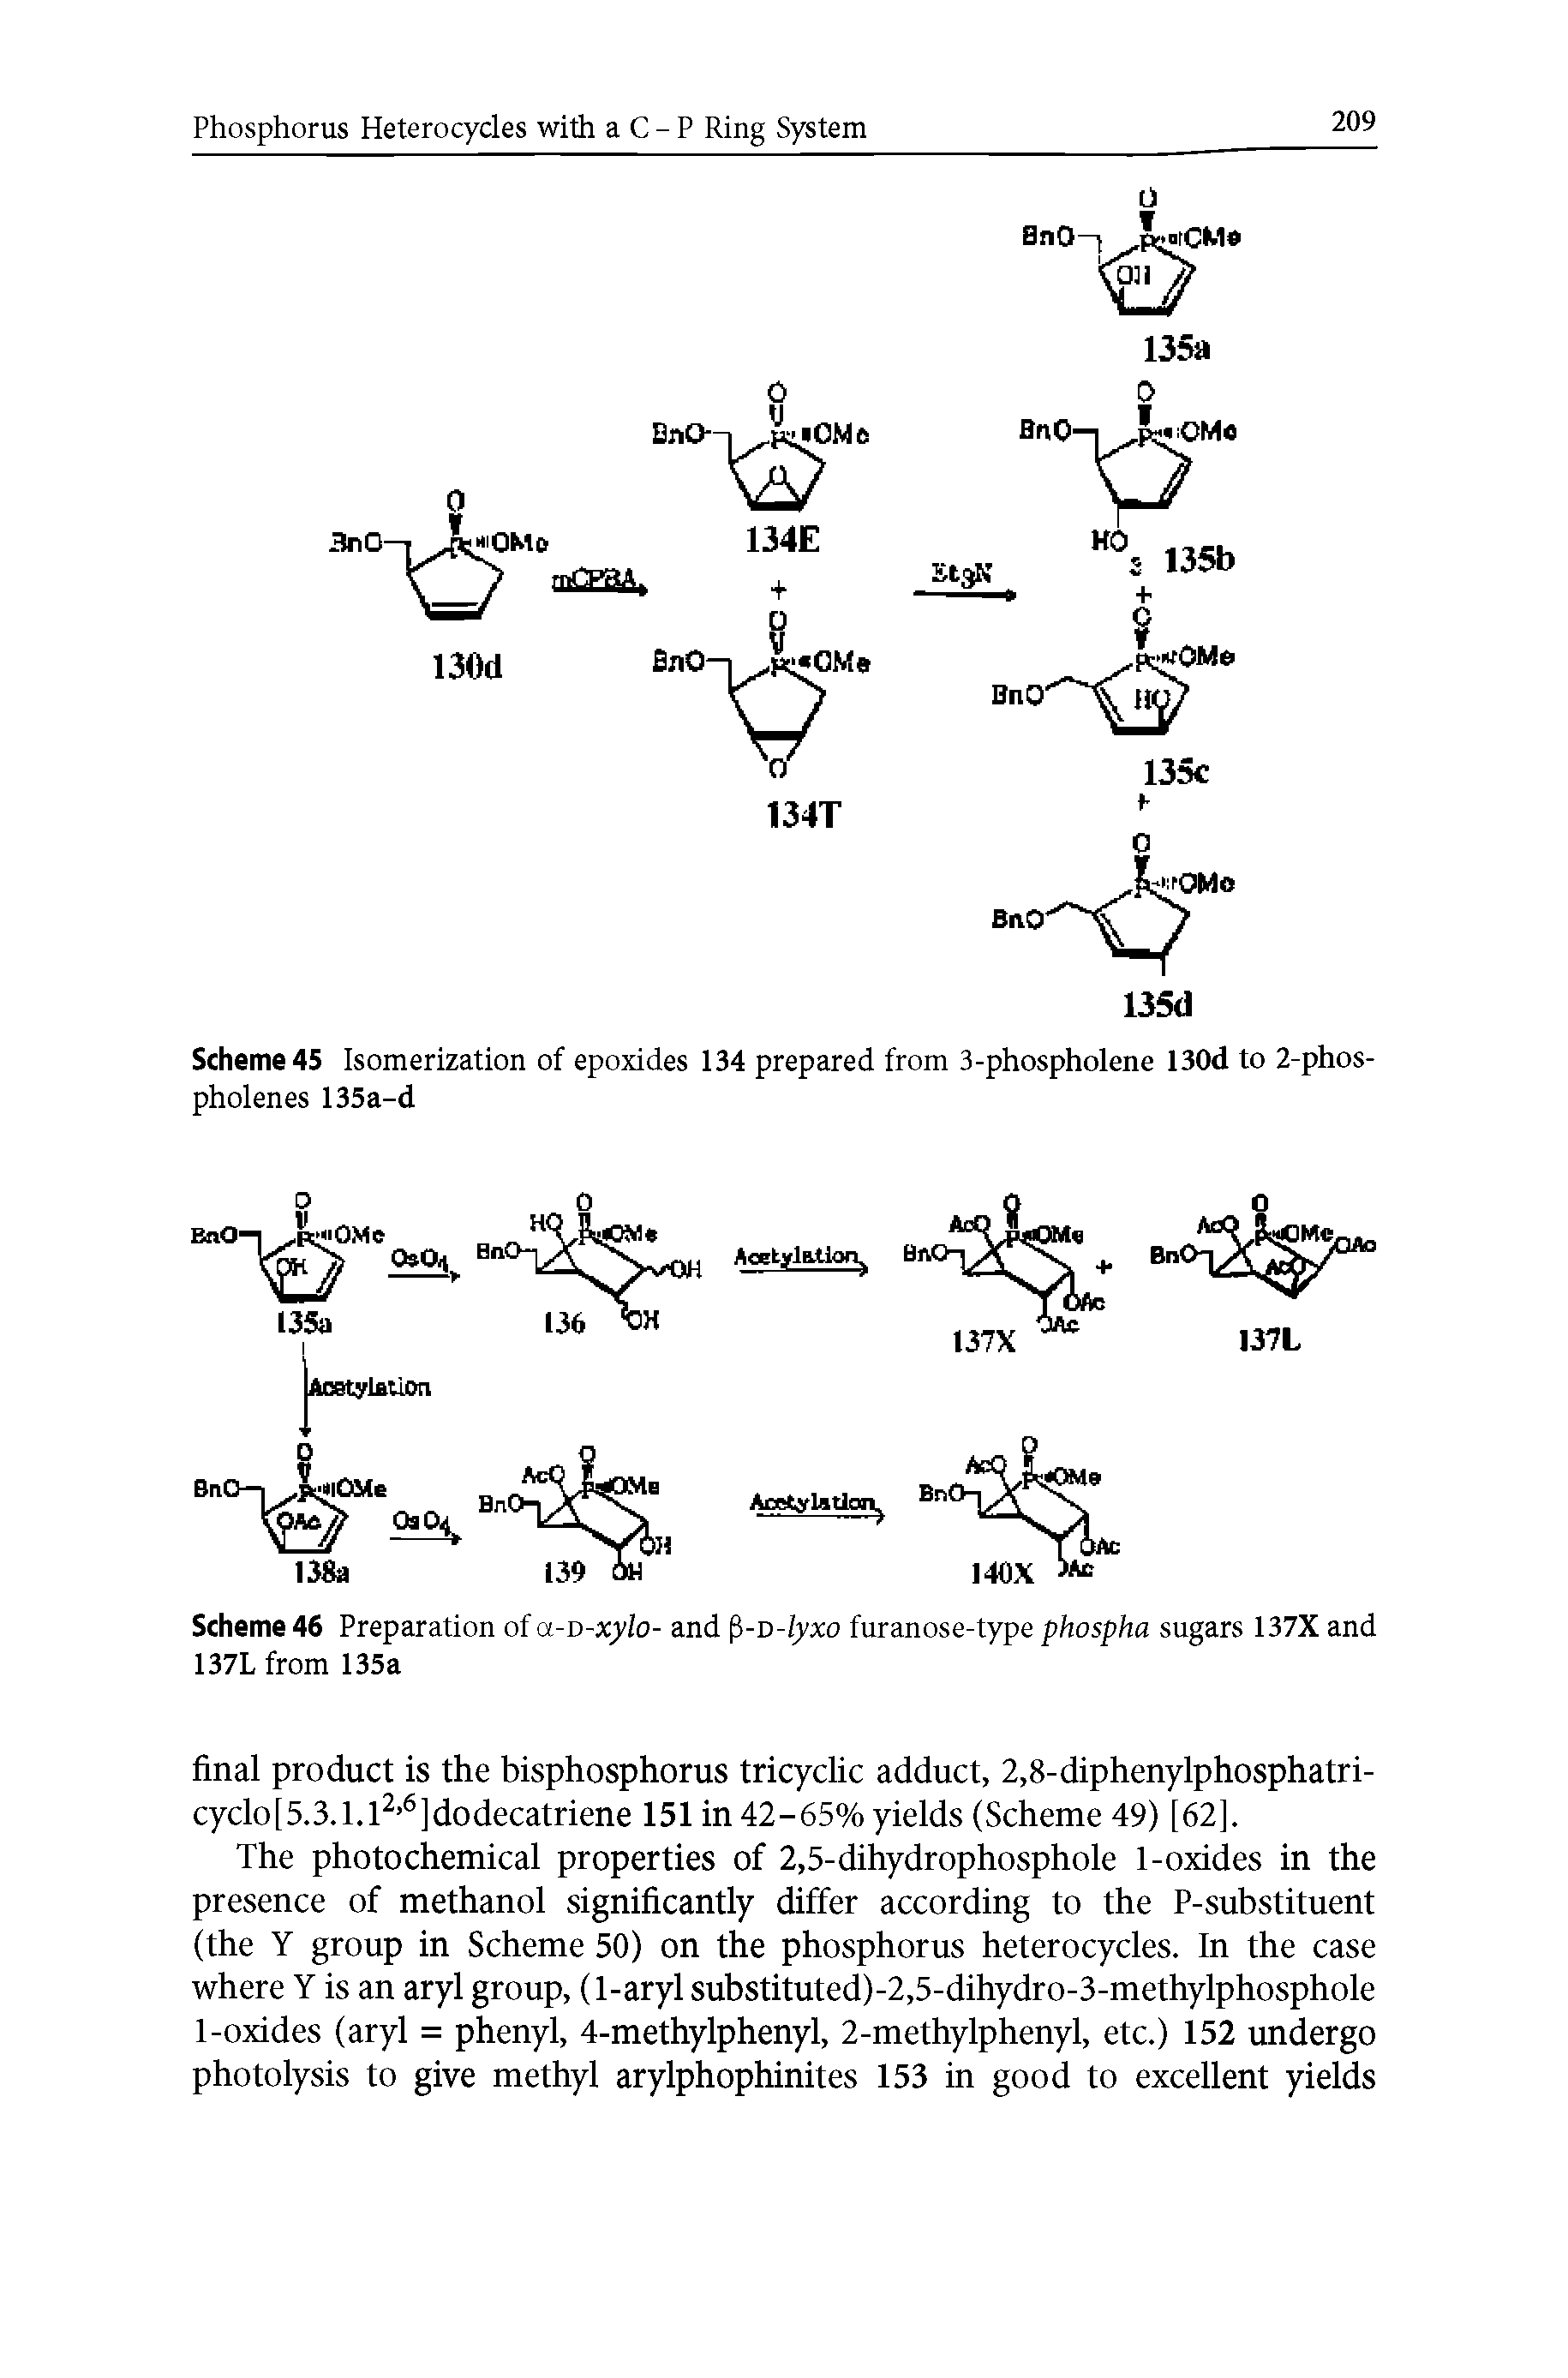 Scheme 46 Preparation of a-D-xylo- and -D-lyxo furanose-type phospha sugars 137X and 137L from 135a...